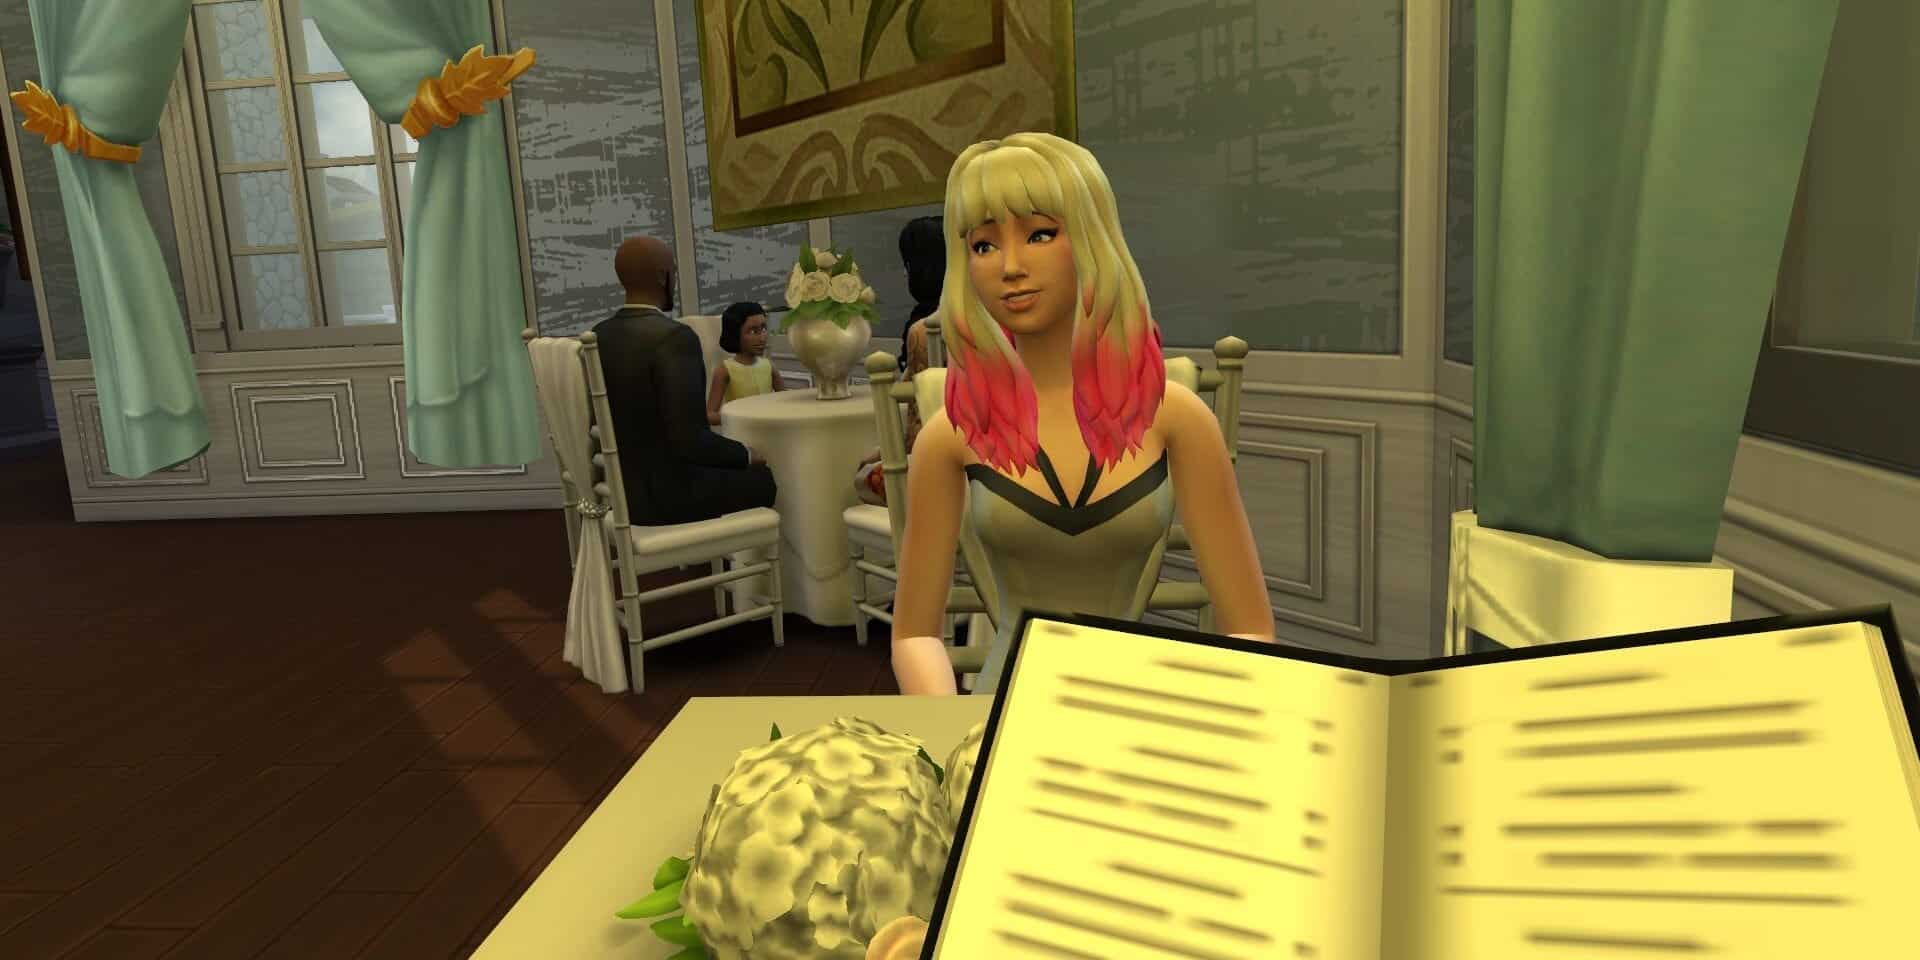 Using the first person in the Sims 4 in a restaurant.